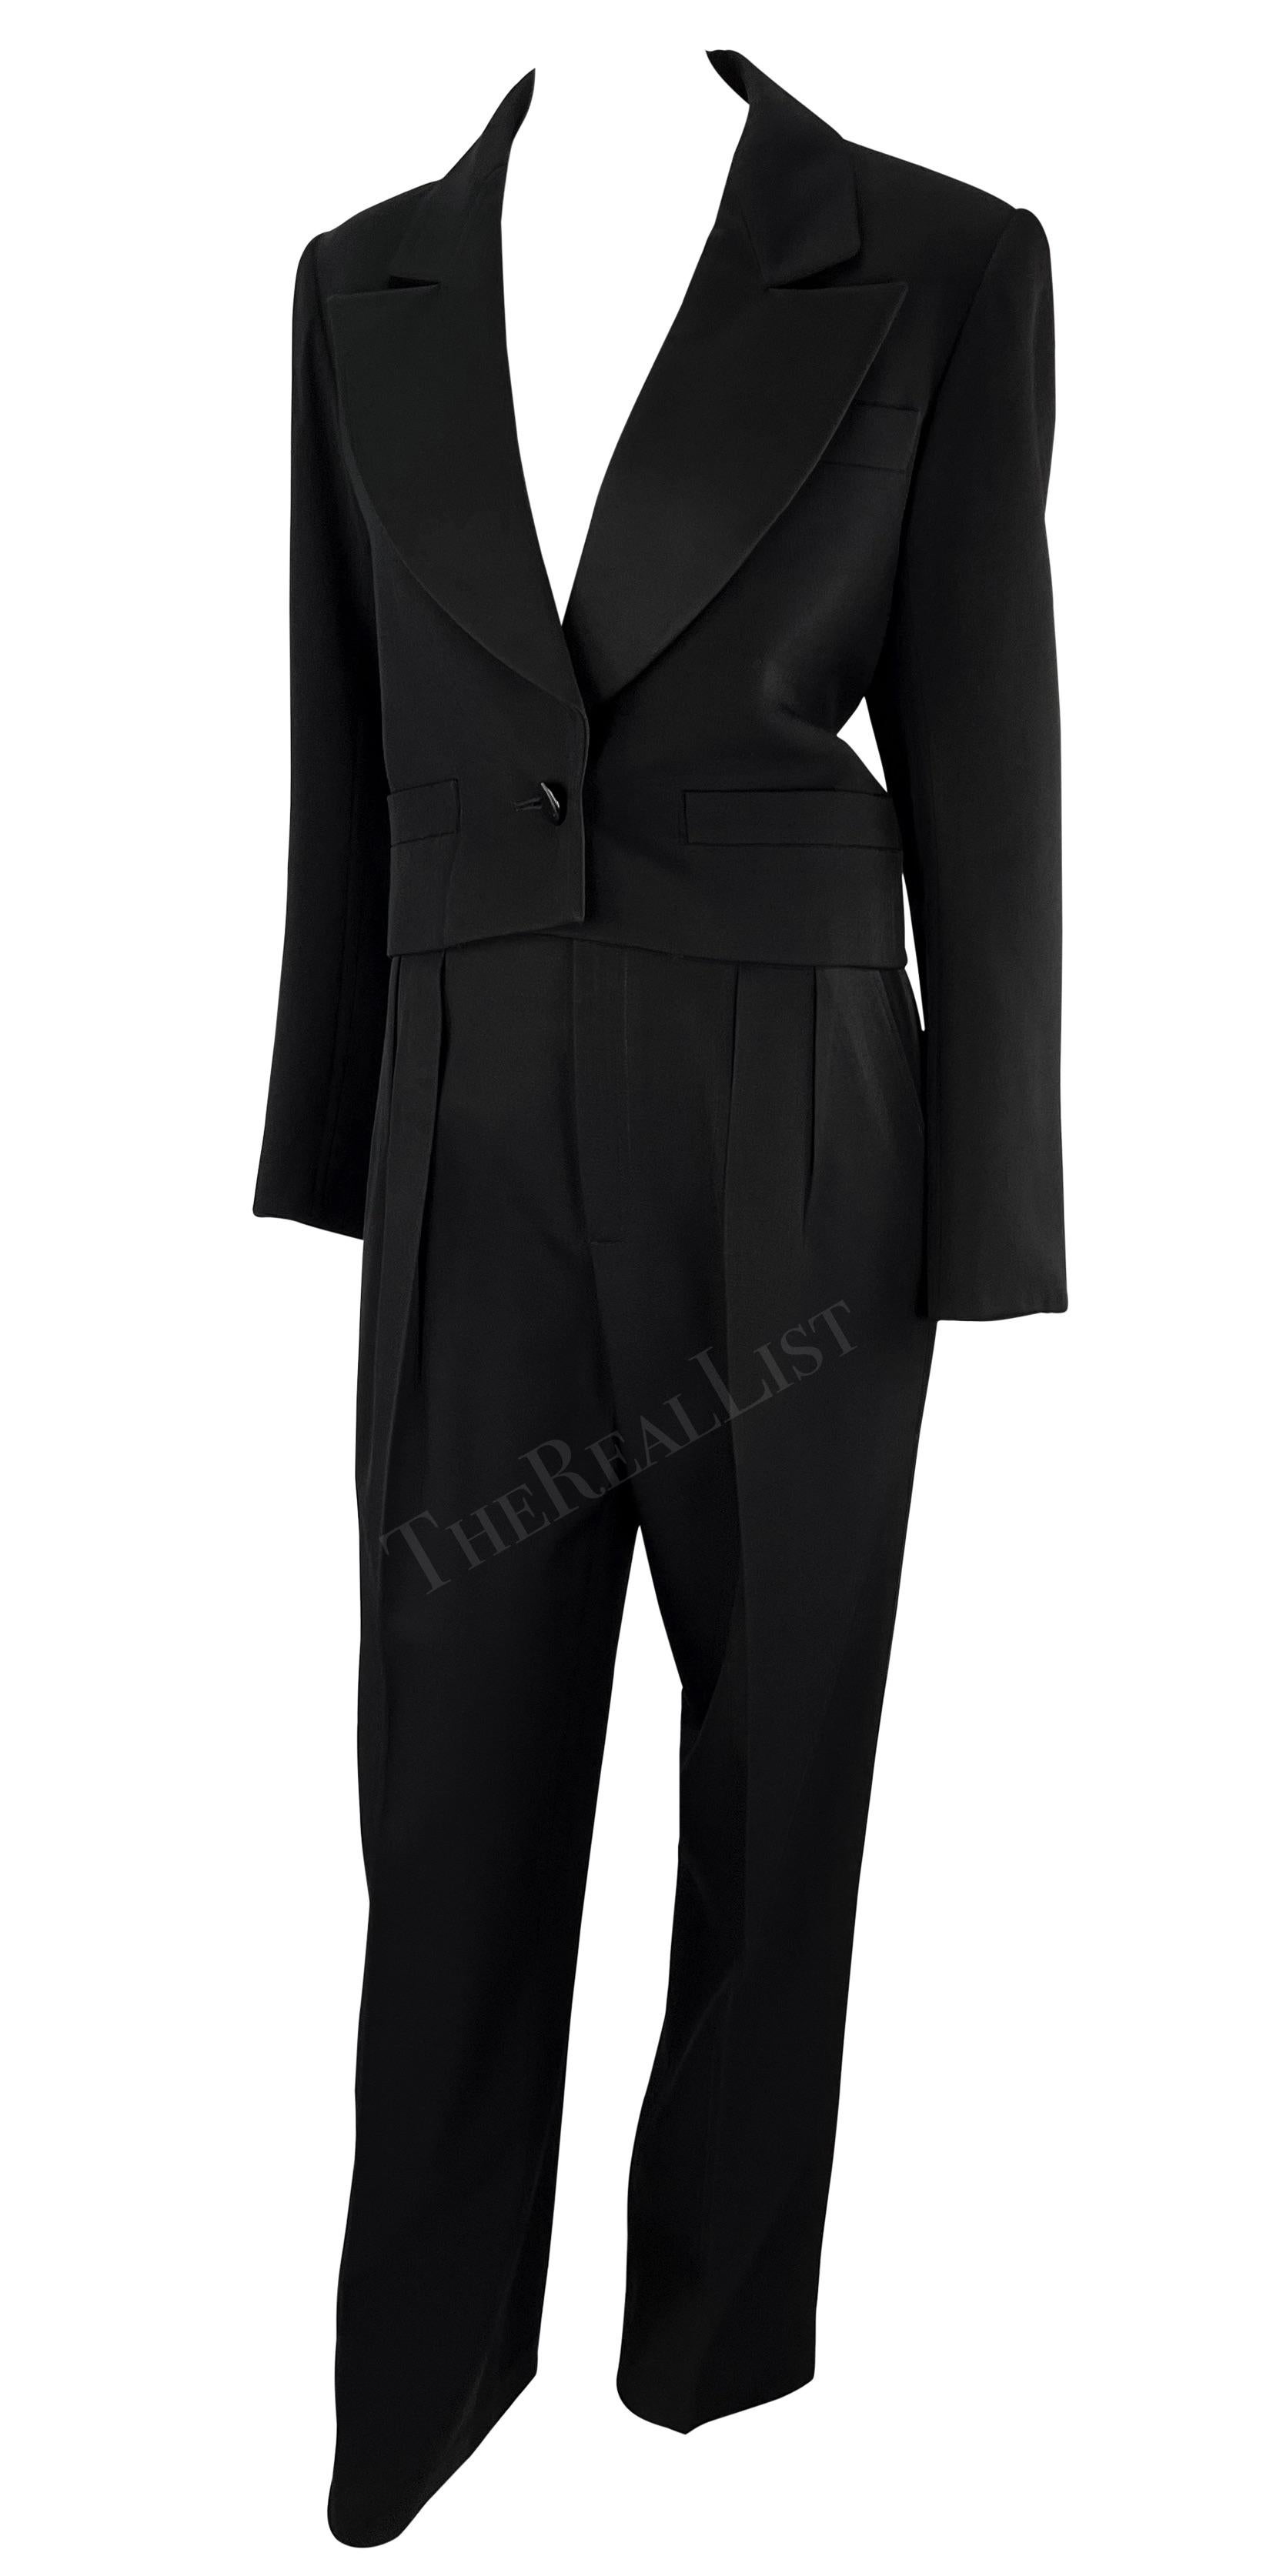 Presenting a fabulous black Yves Saint Laurent Rive Gauche cropped pant suit, designed by Yves Saint Laurent. From the 1980s, this two-piece pant suit set consists of a cropped version of the house's famous 'le smoking' jacket and a pair of